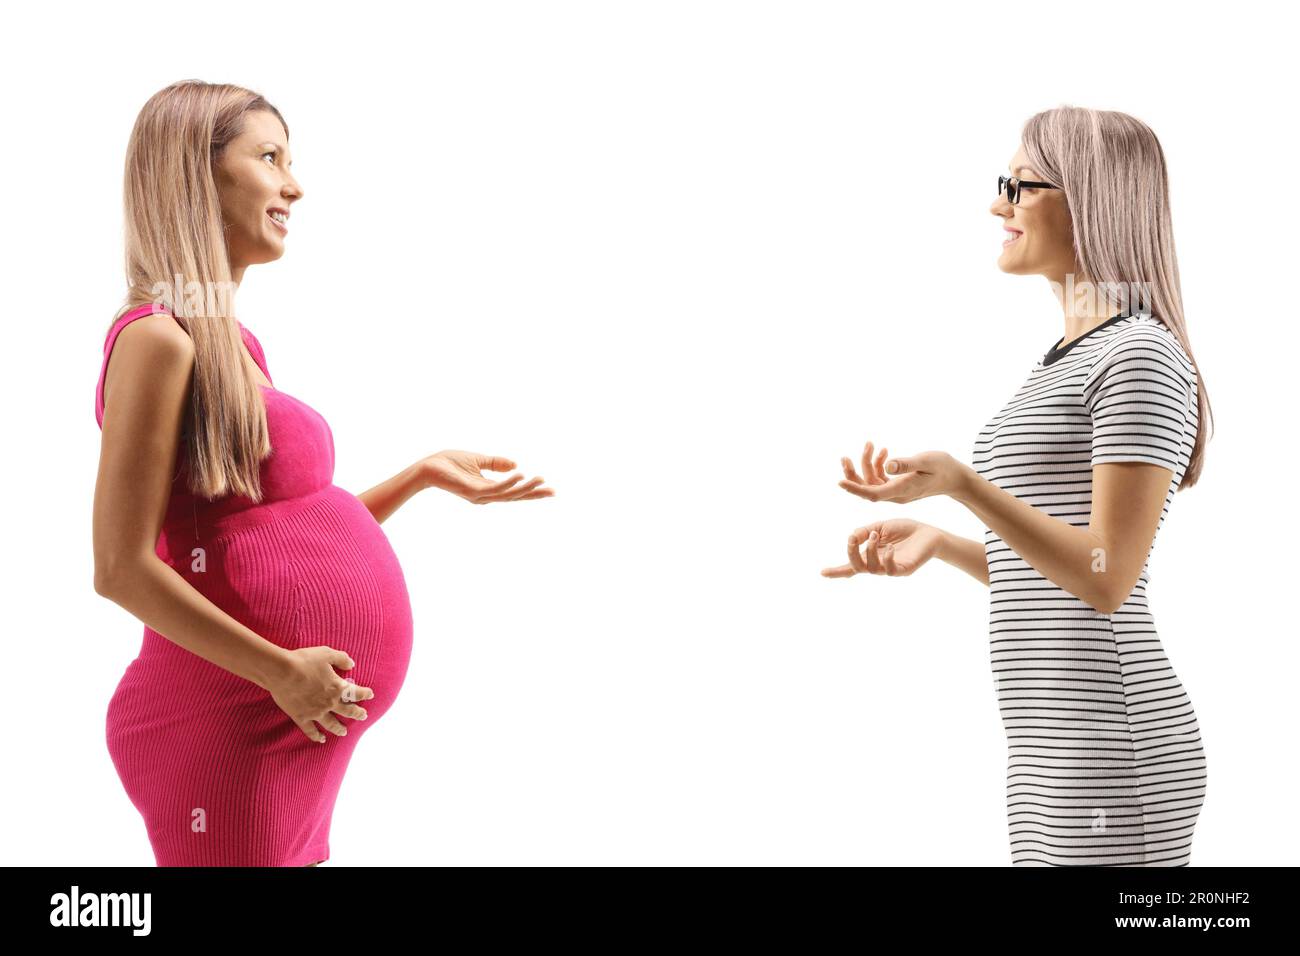 Profile shot of a pregnant woman having a conversation with another woman isolated on white background Stock Photo